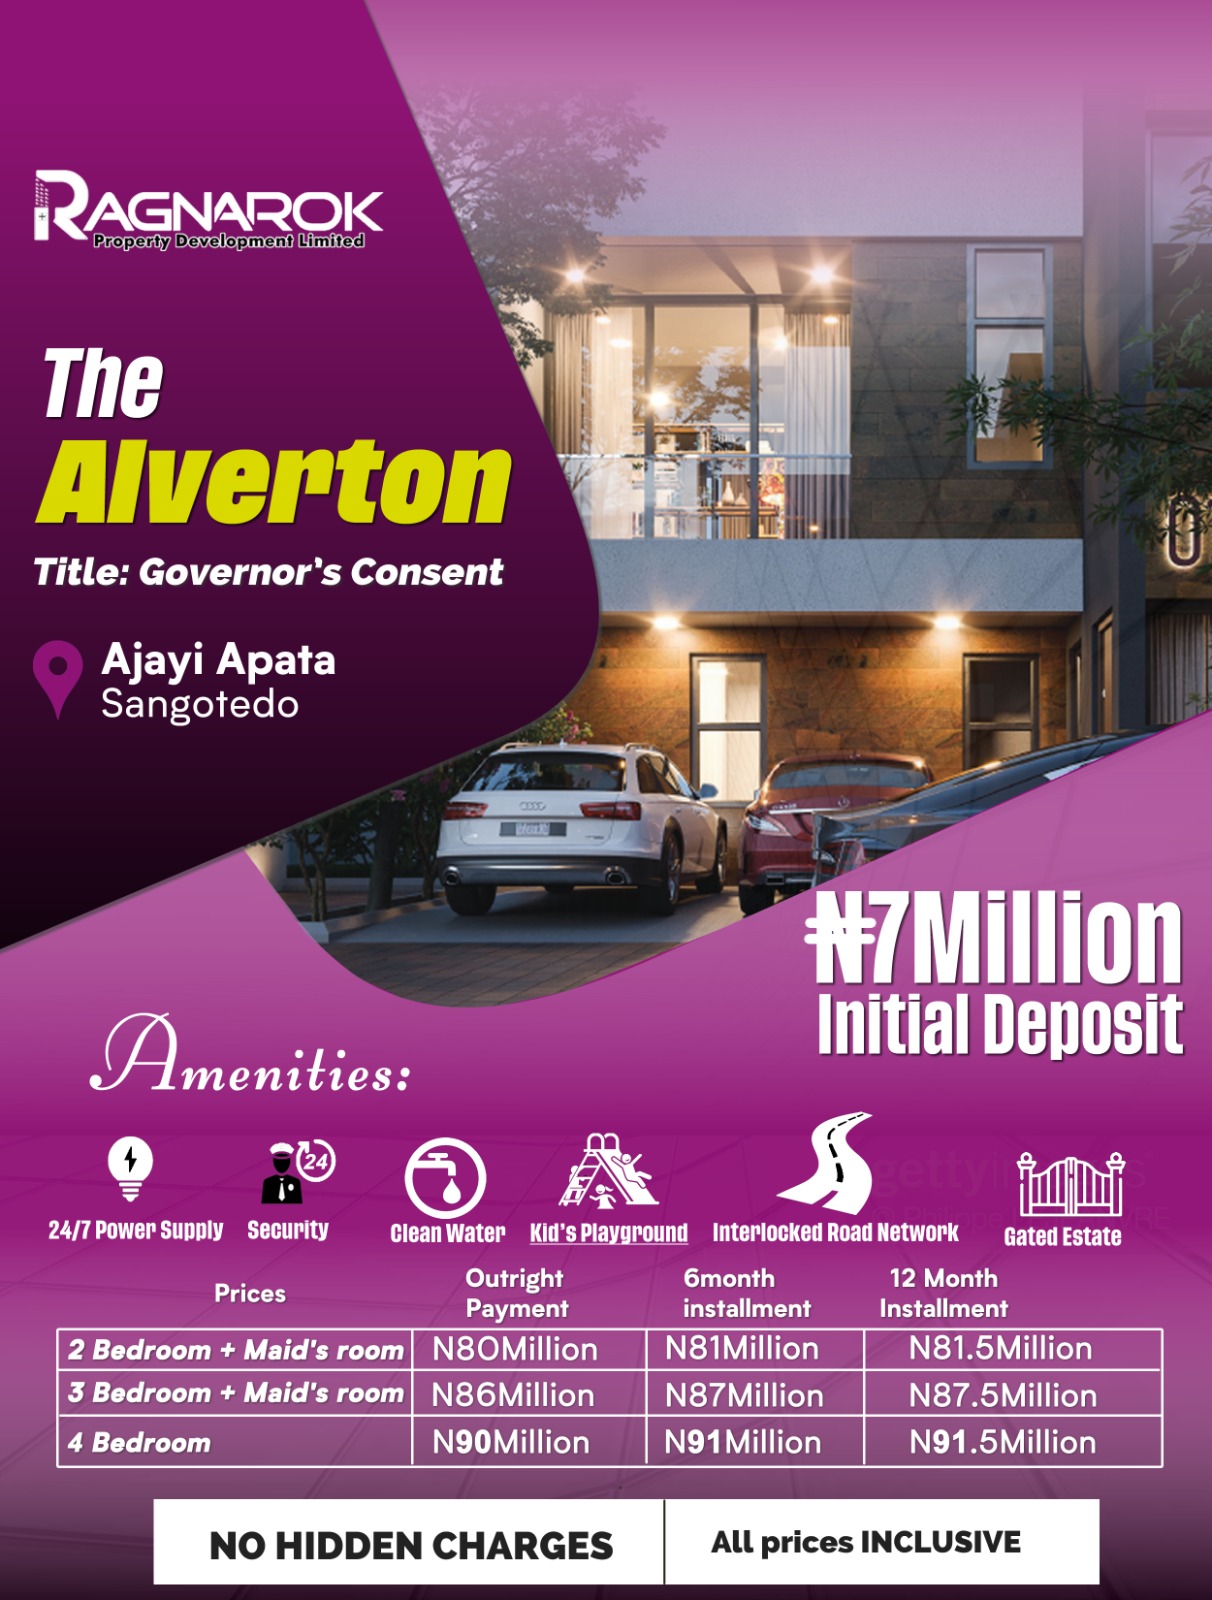 The Alverton is an intellectually crafted Smart Estate comprising of a total of 20 housing units (11units of 2 bedroom terraces + maid’s room and 9 units 3 bedroom terraces + maid’s room).